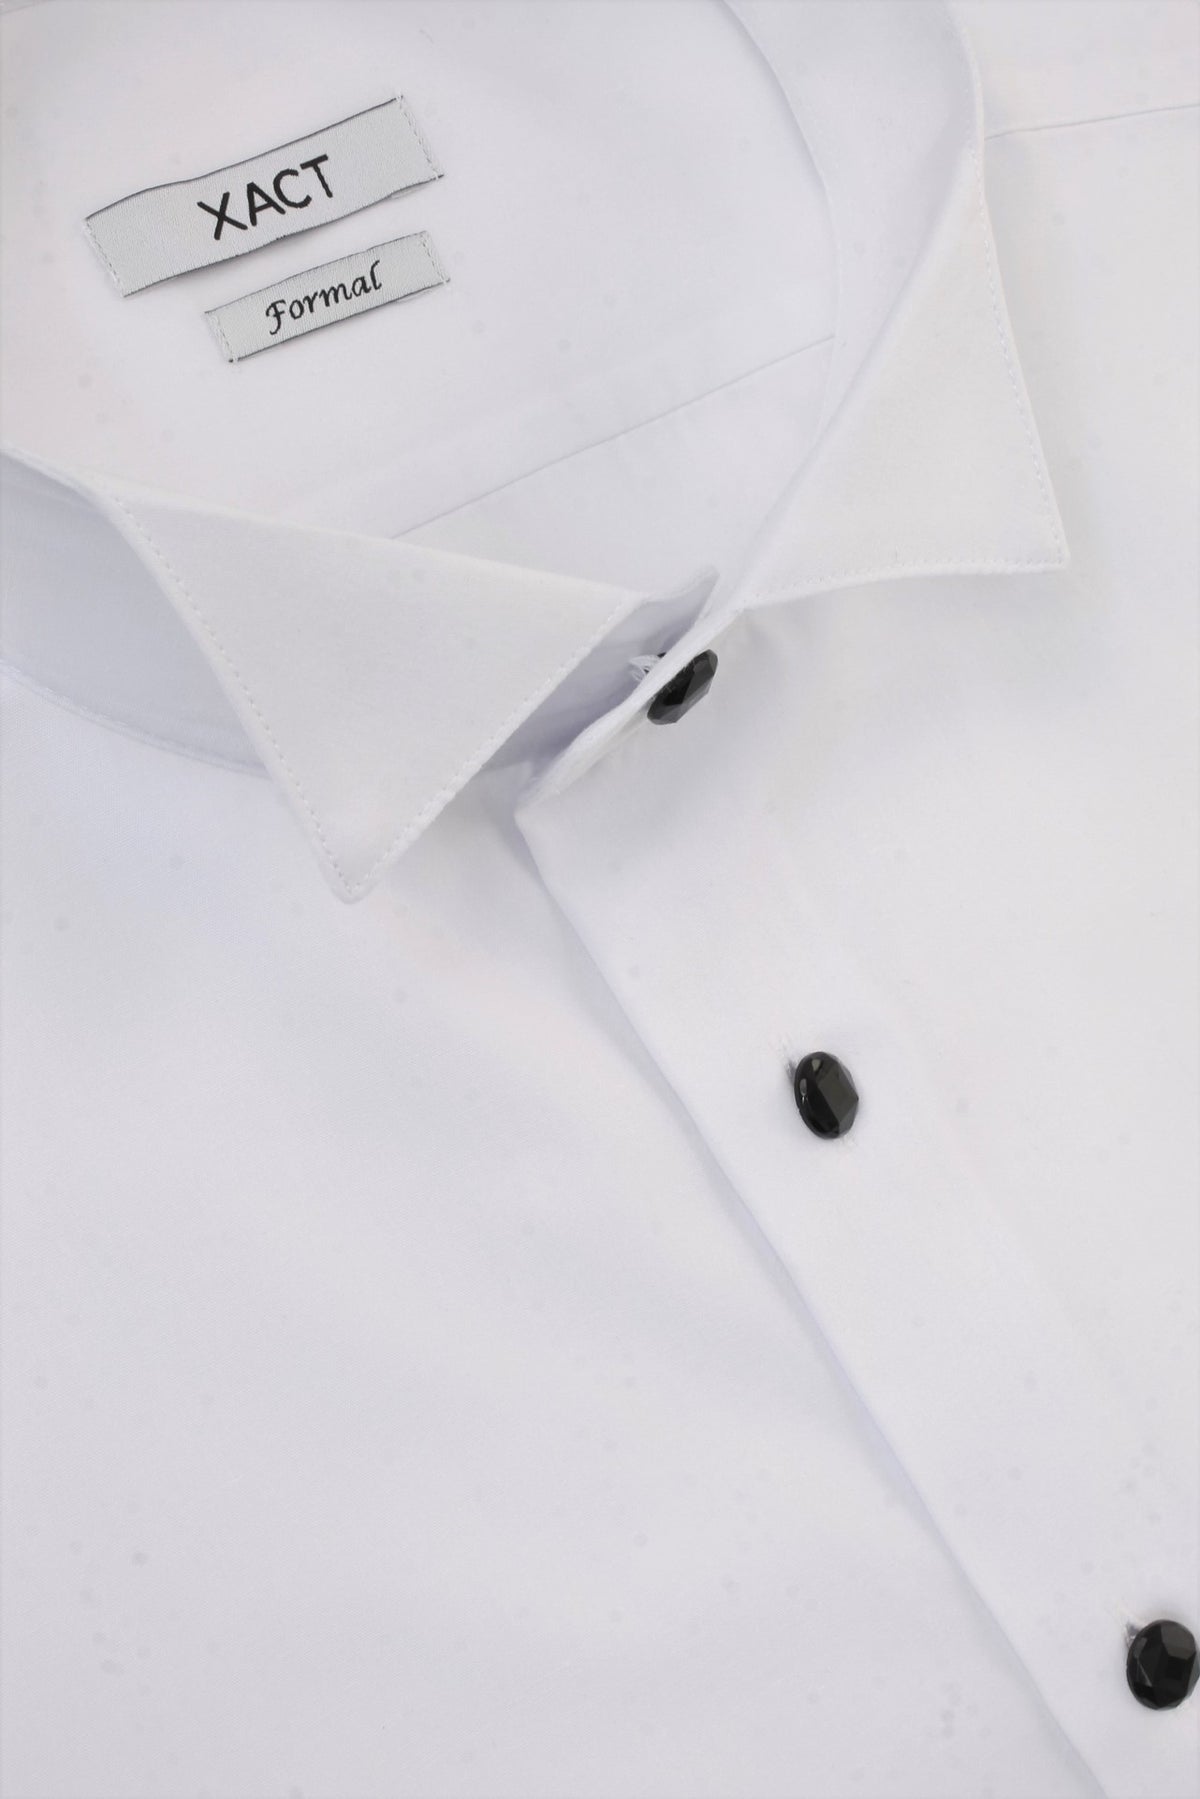 #group_white---wing-collar---black-buttons